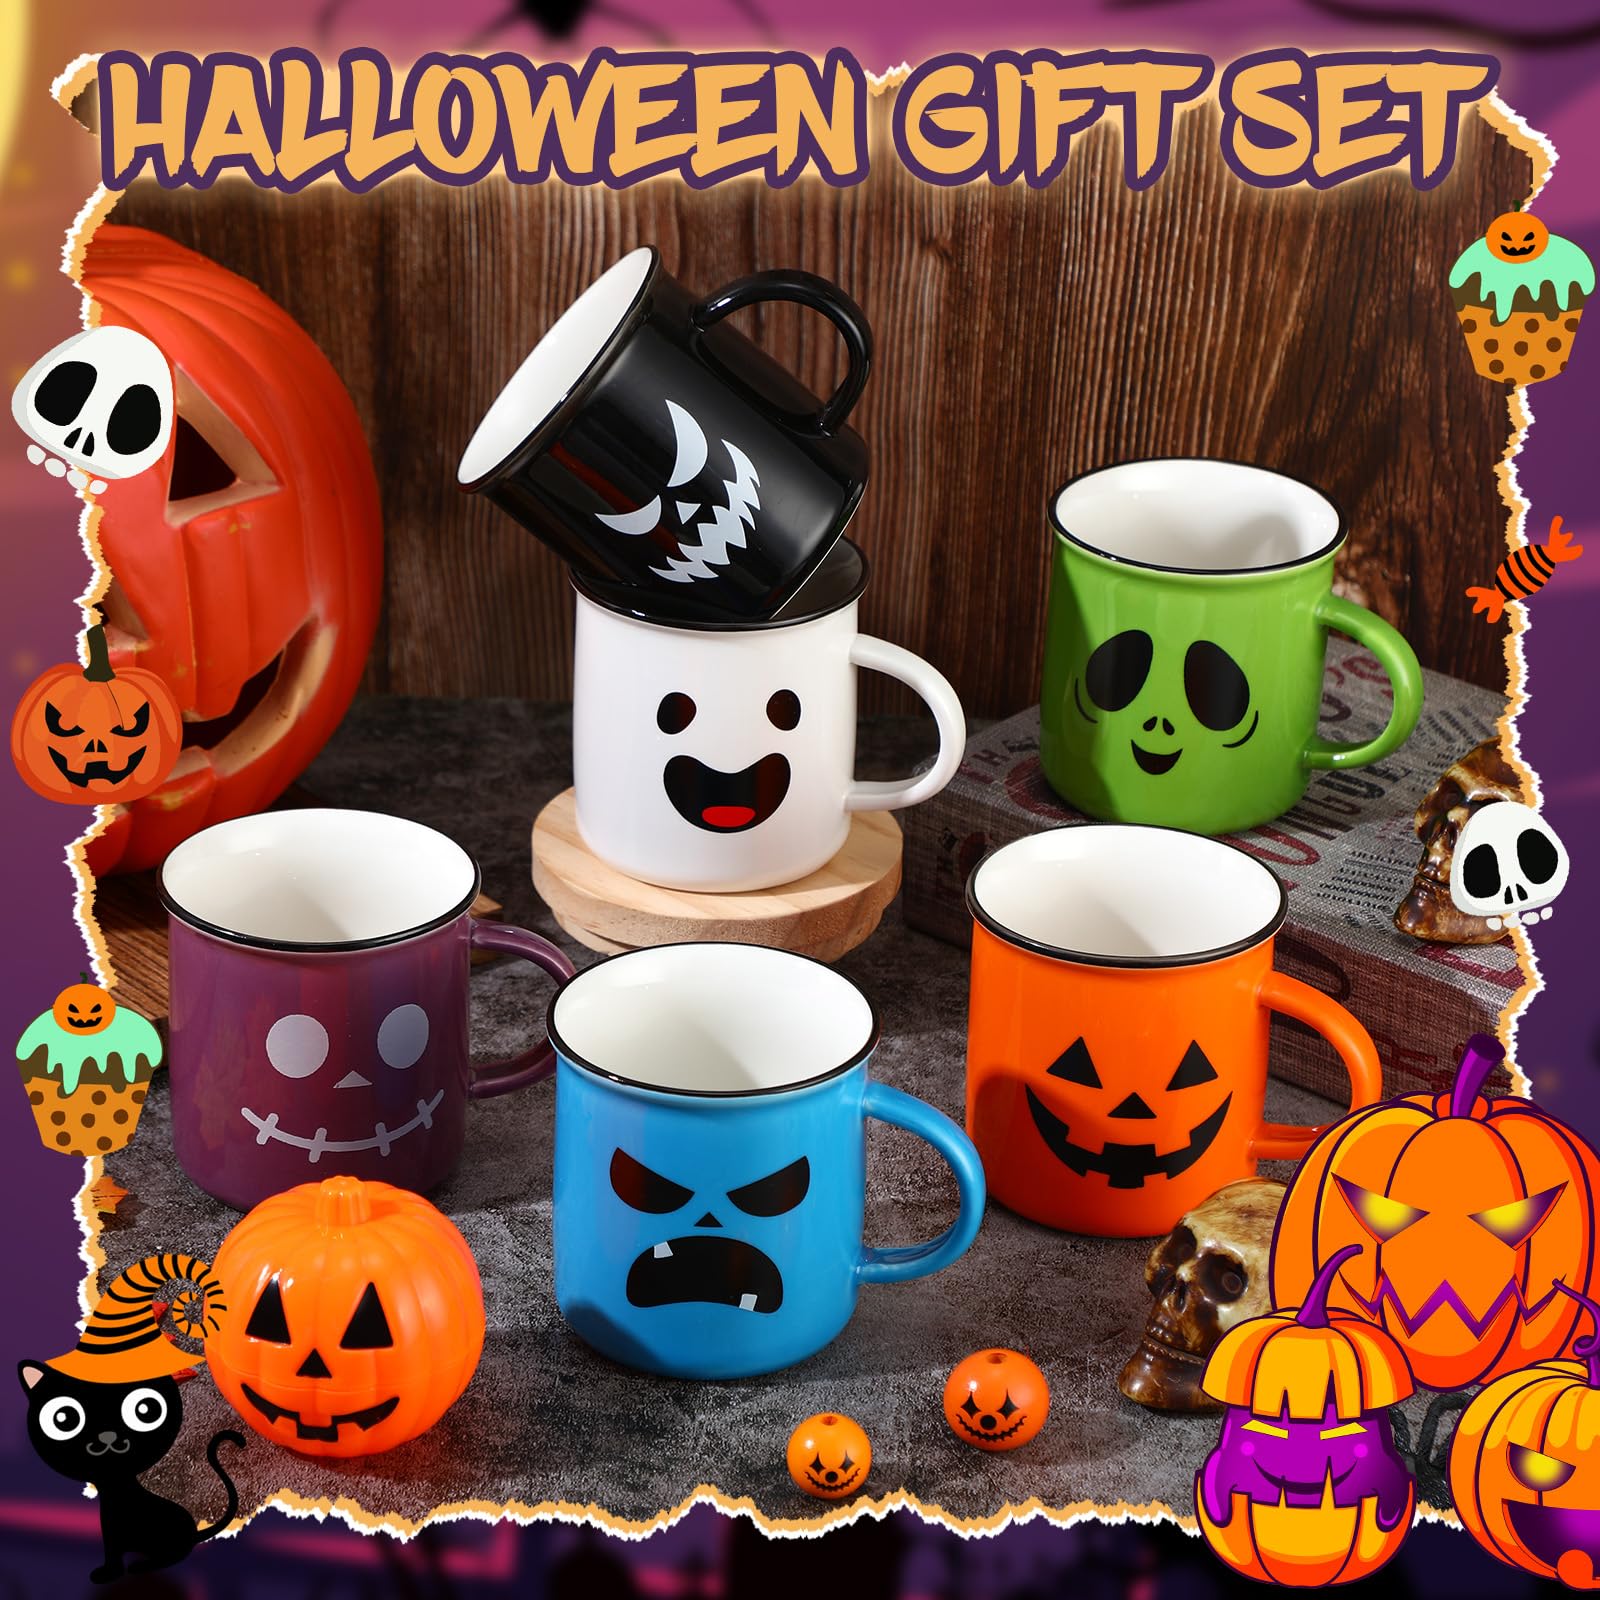 Bokon Halloween Coffee Mug Set of 6 Scary Pumpkin Ghost Spooky Smile Face Ceramic Cup Trick or Treat Gifts for Fall Party Decor Home Office Housewarming Novelty Accessories, 8.5 Oz, 6 Colors